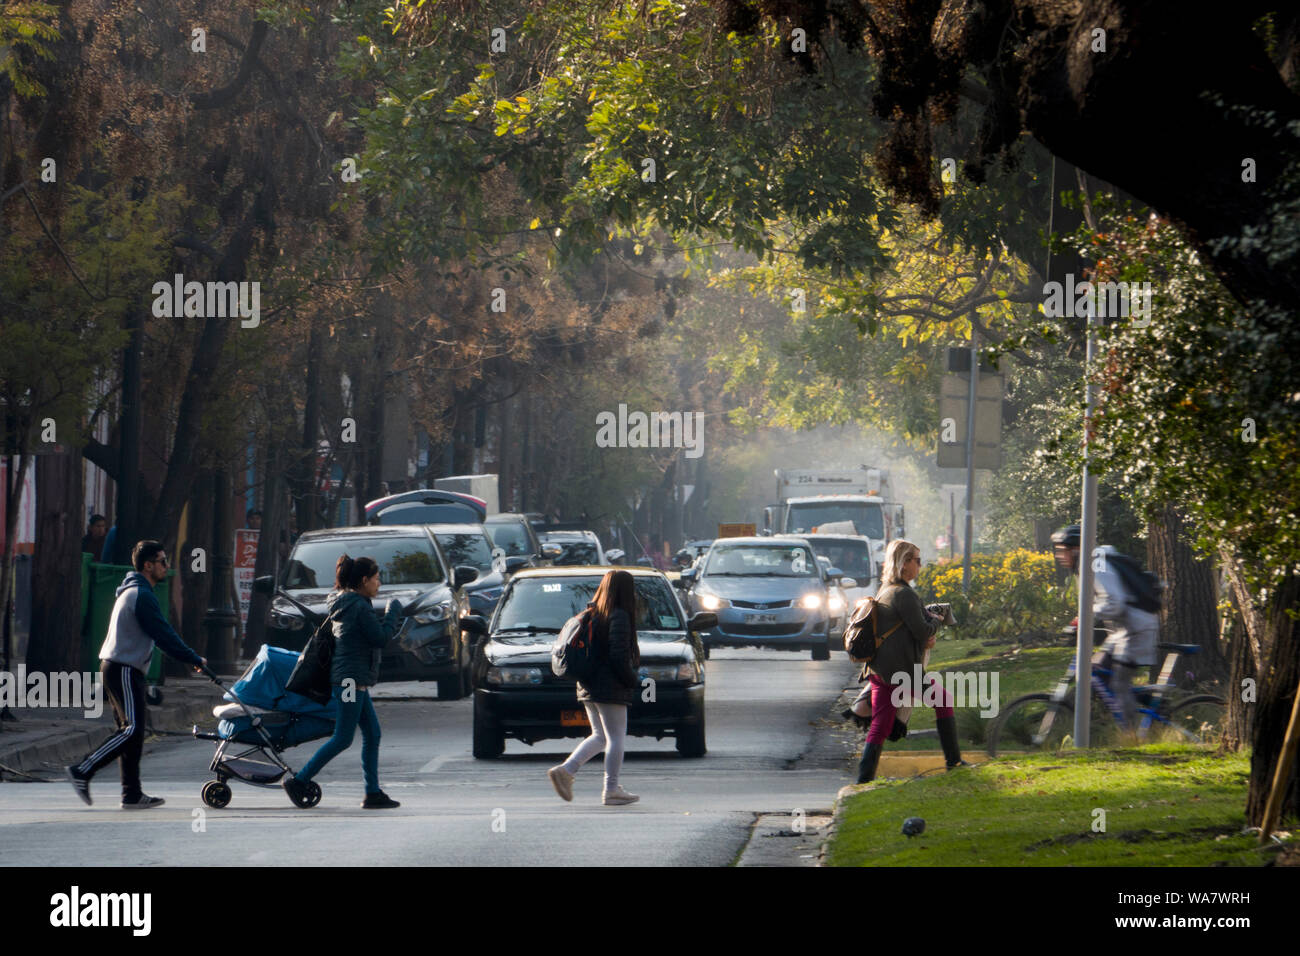 Pedestrians crossing the street in Barrio Yungay, Santiago, Chile Stock Photo